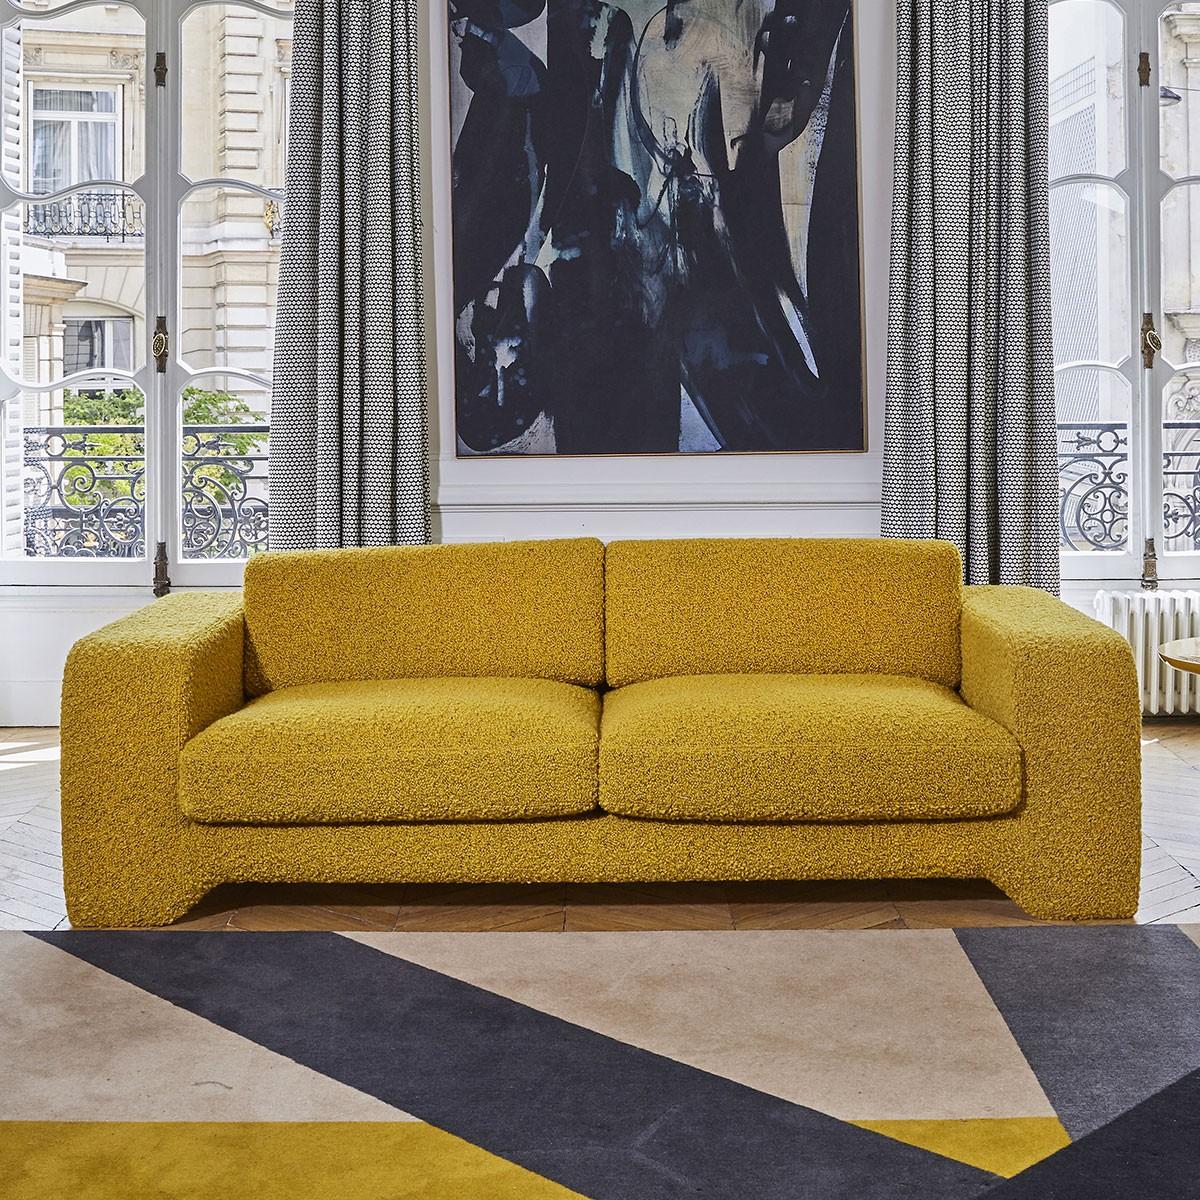 Popus Editions Giovanna 2.5 Seater Sofa in Oil Petrol Como Velvet Upholstery.

Giovanna is a sofa with a strong profile. A sober, plush line, with this famous detail that changes everything, so as not to forget its strength of character and this